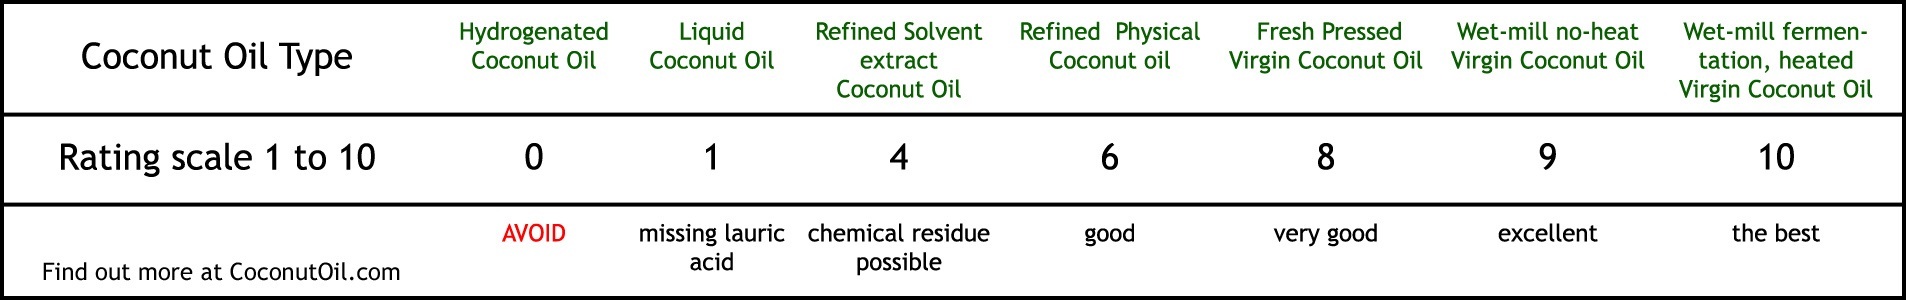 types-coconut-oil-rating